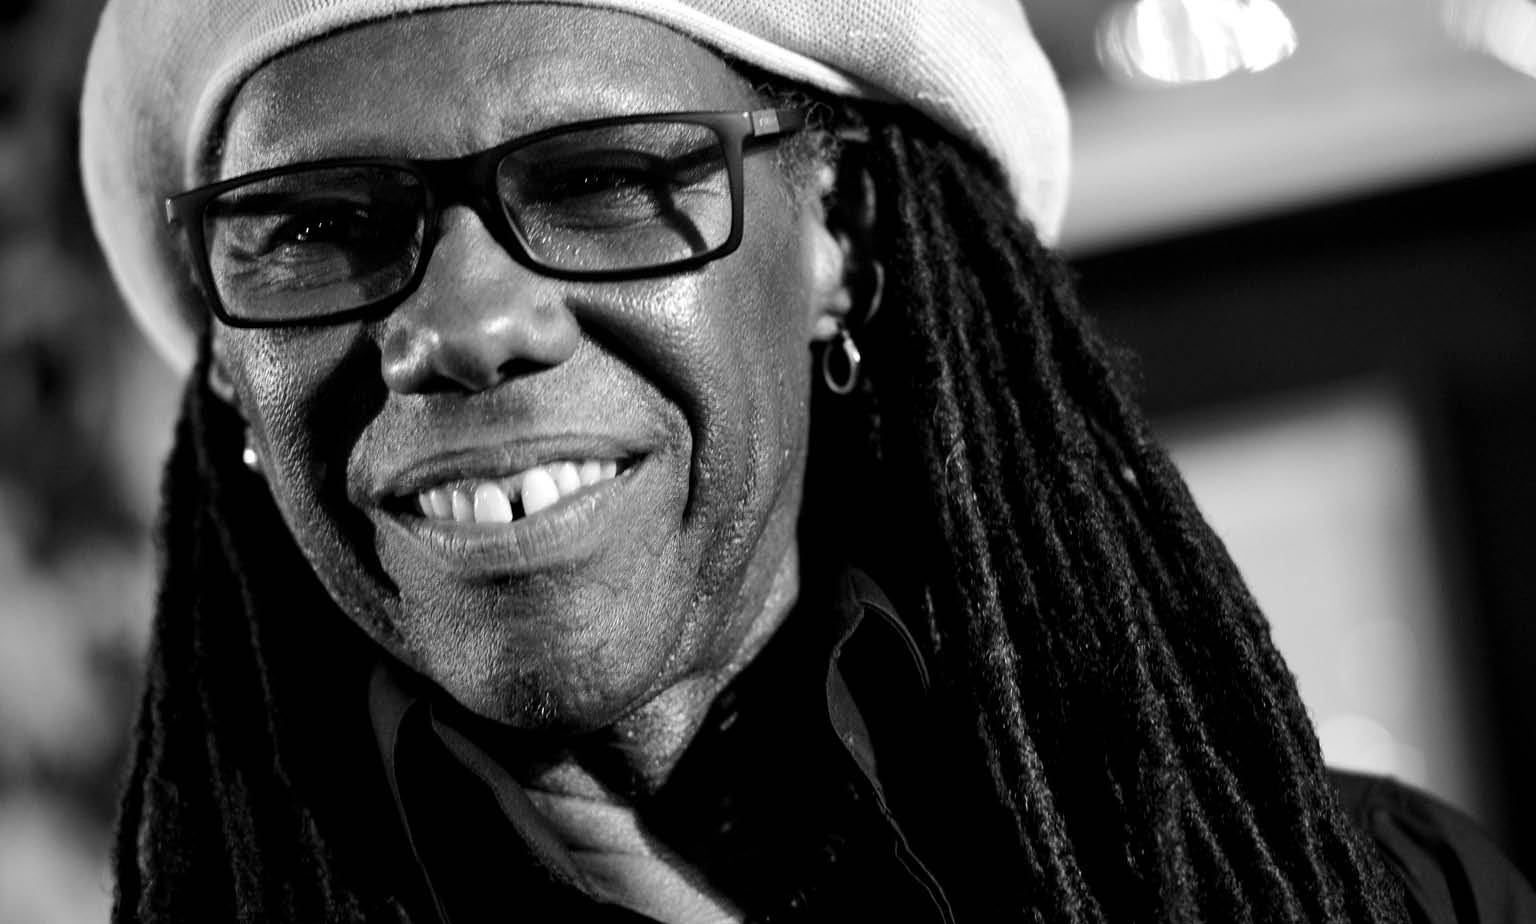 BURBANK, CA - MARCH 13: (EDITORS NOTE: Image was shot in black and white. Color version not available.) Musician Nile Rodgers appears onstage for a Q&A and to perform at a "Disco Party" at Warner Brothers Records on March 13, 2015 in Burbank, California.   Kevin Winter, Image: 226757834, License: Rights-managed, Restrictions: (EDITORS NOTE: Image was shot in black and white. Color version not available.), Model Release: no, Credit line: Profimedia, AFP